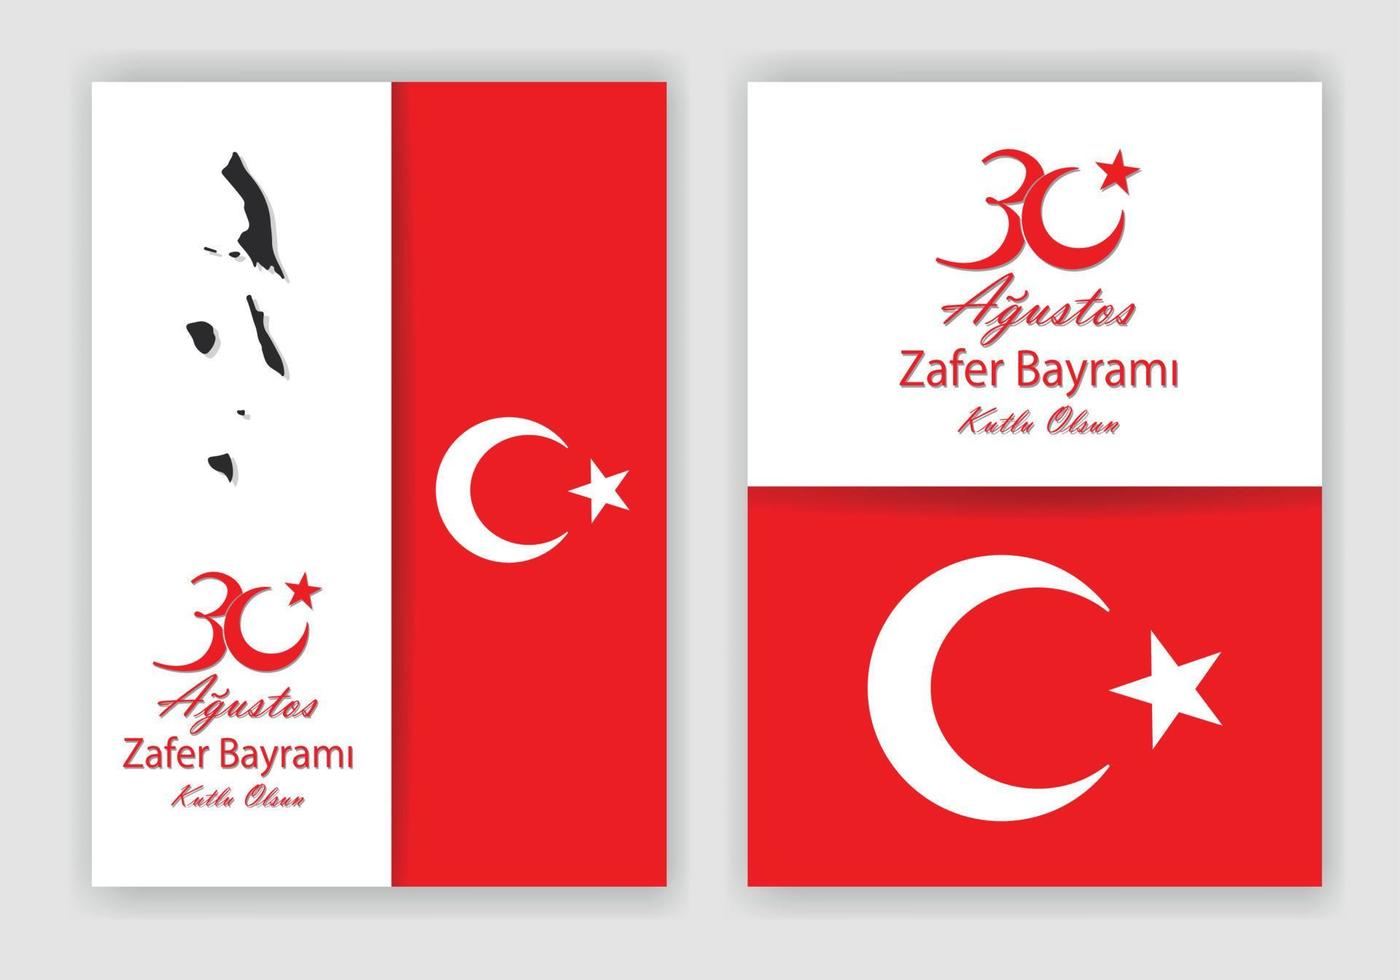 August 30 celebration of victory and the National Day in Turkey. Greeting card template. vector